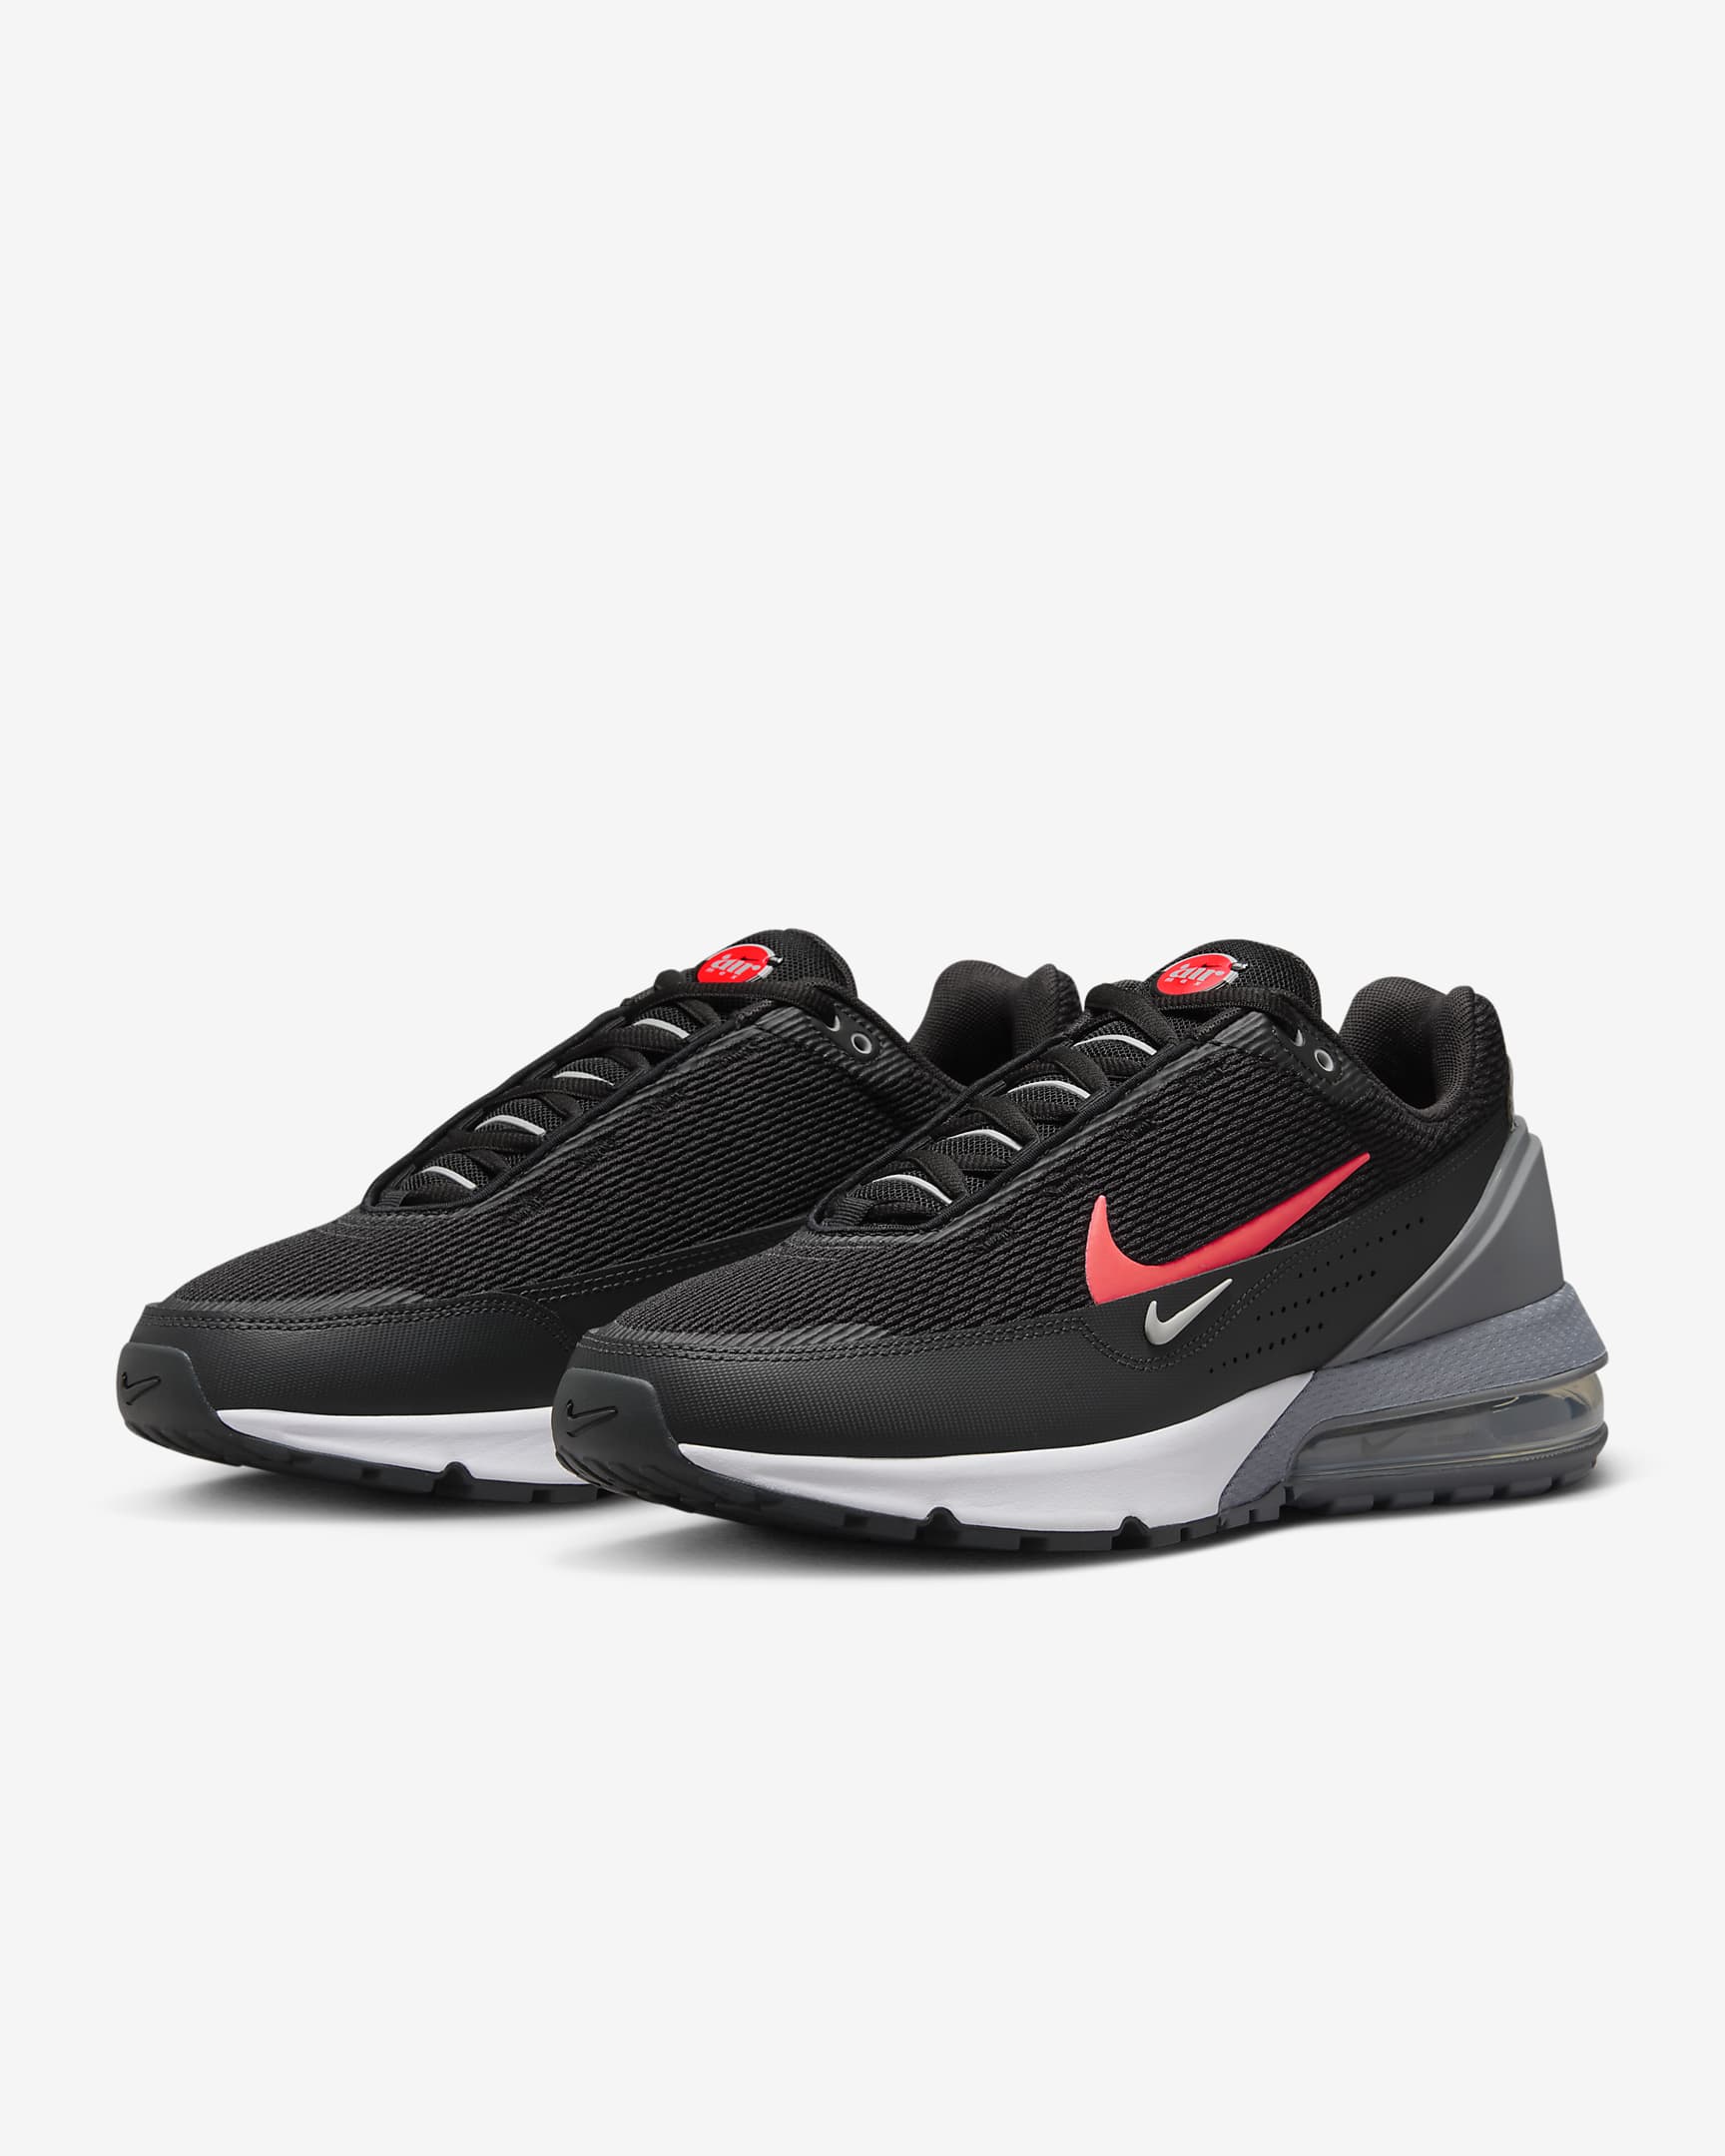 Chaussure Nike Air Max Pulse pour homme - Noir/Smoke Grey/Anthracite/Bright Crimson